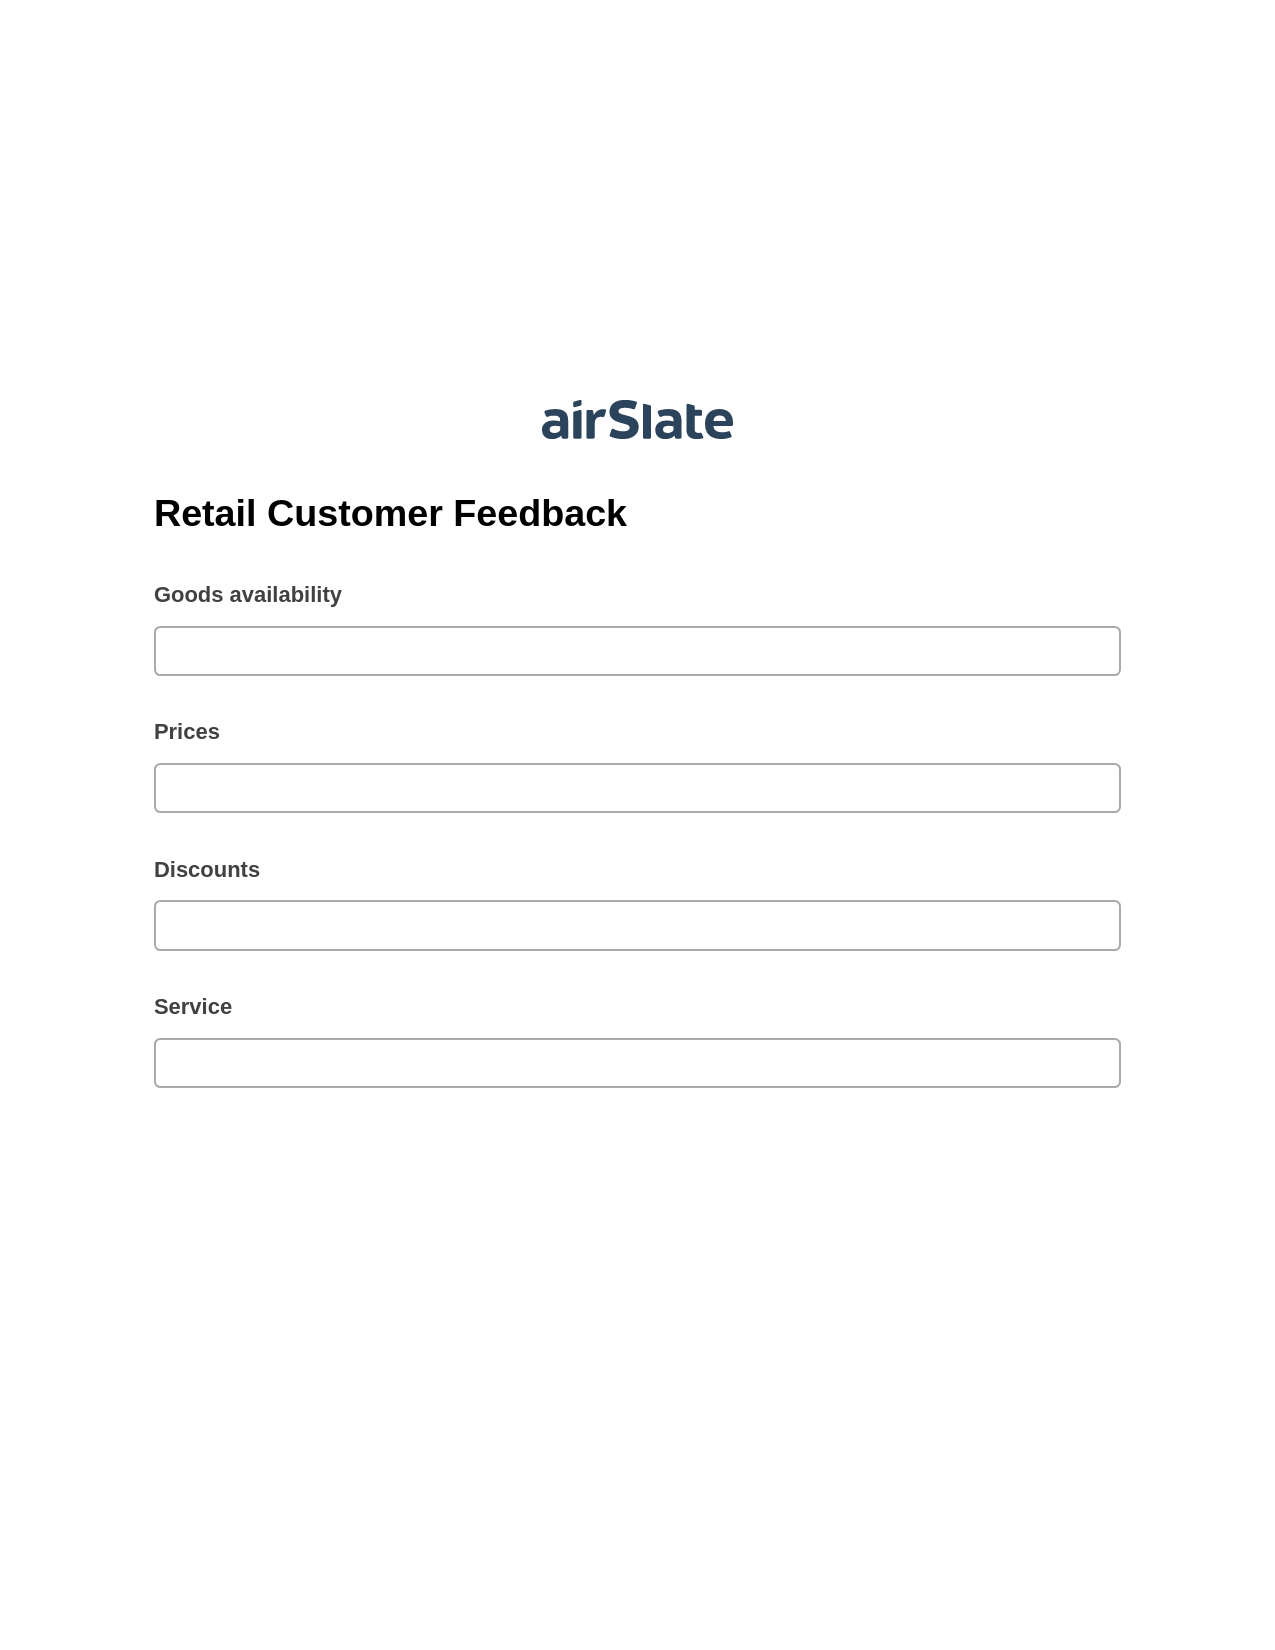 Retail Customer Feedback Pre-fill from another Slate Bot, Email Notification Bot, OneDrive Bot